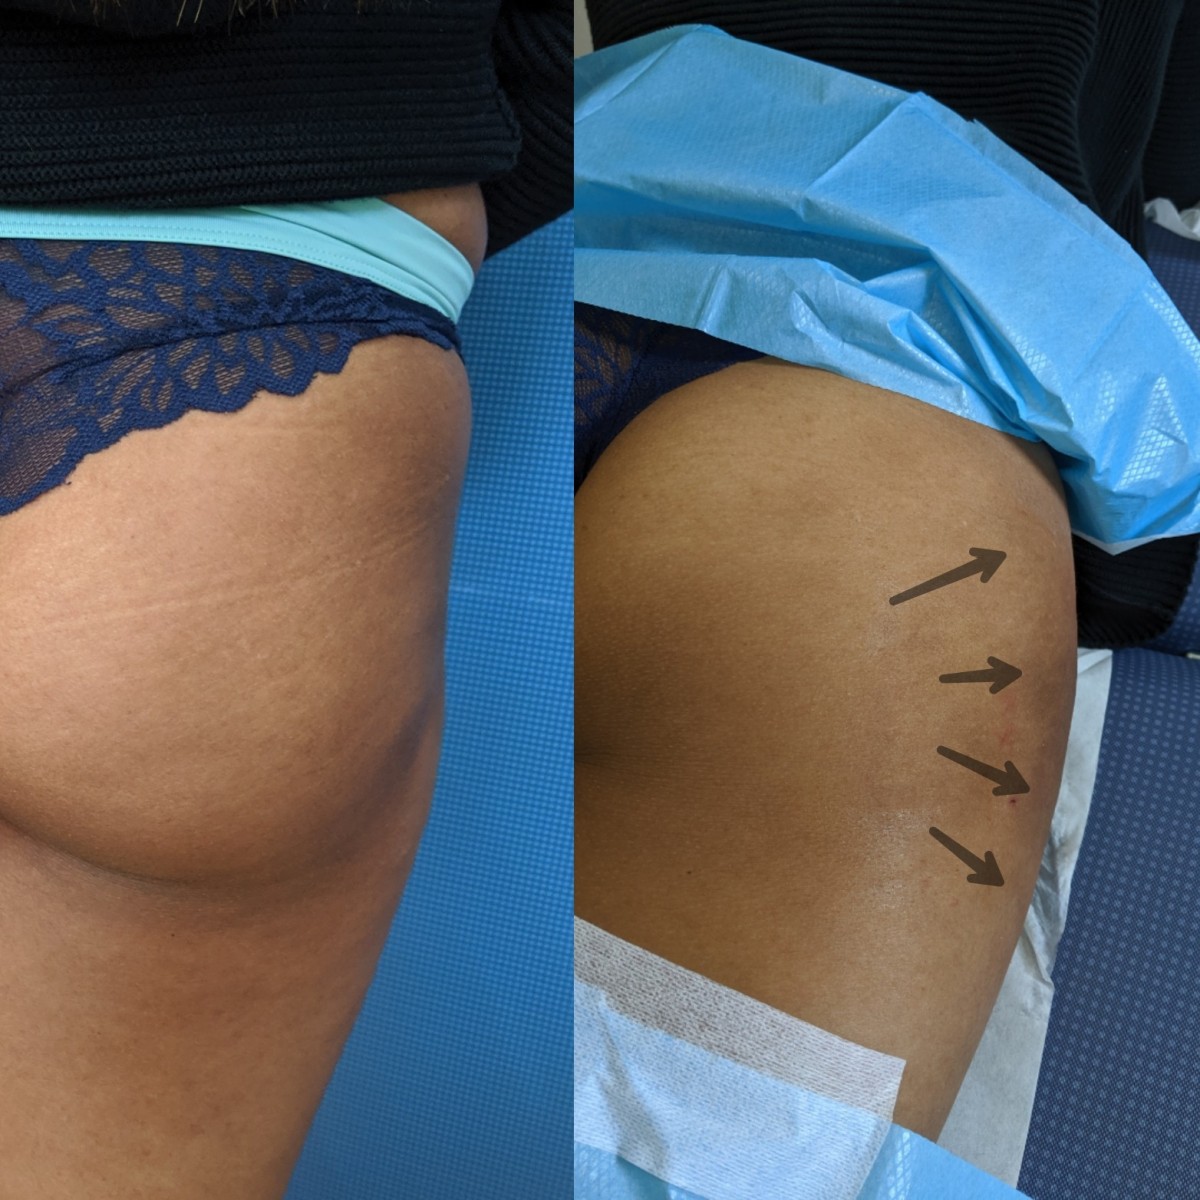 Enhance Your Butt With a Non Surgical Butt Lift